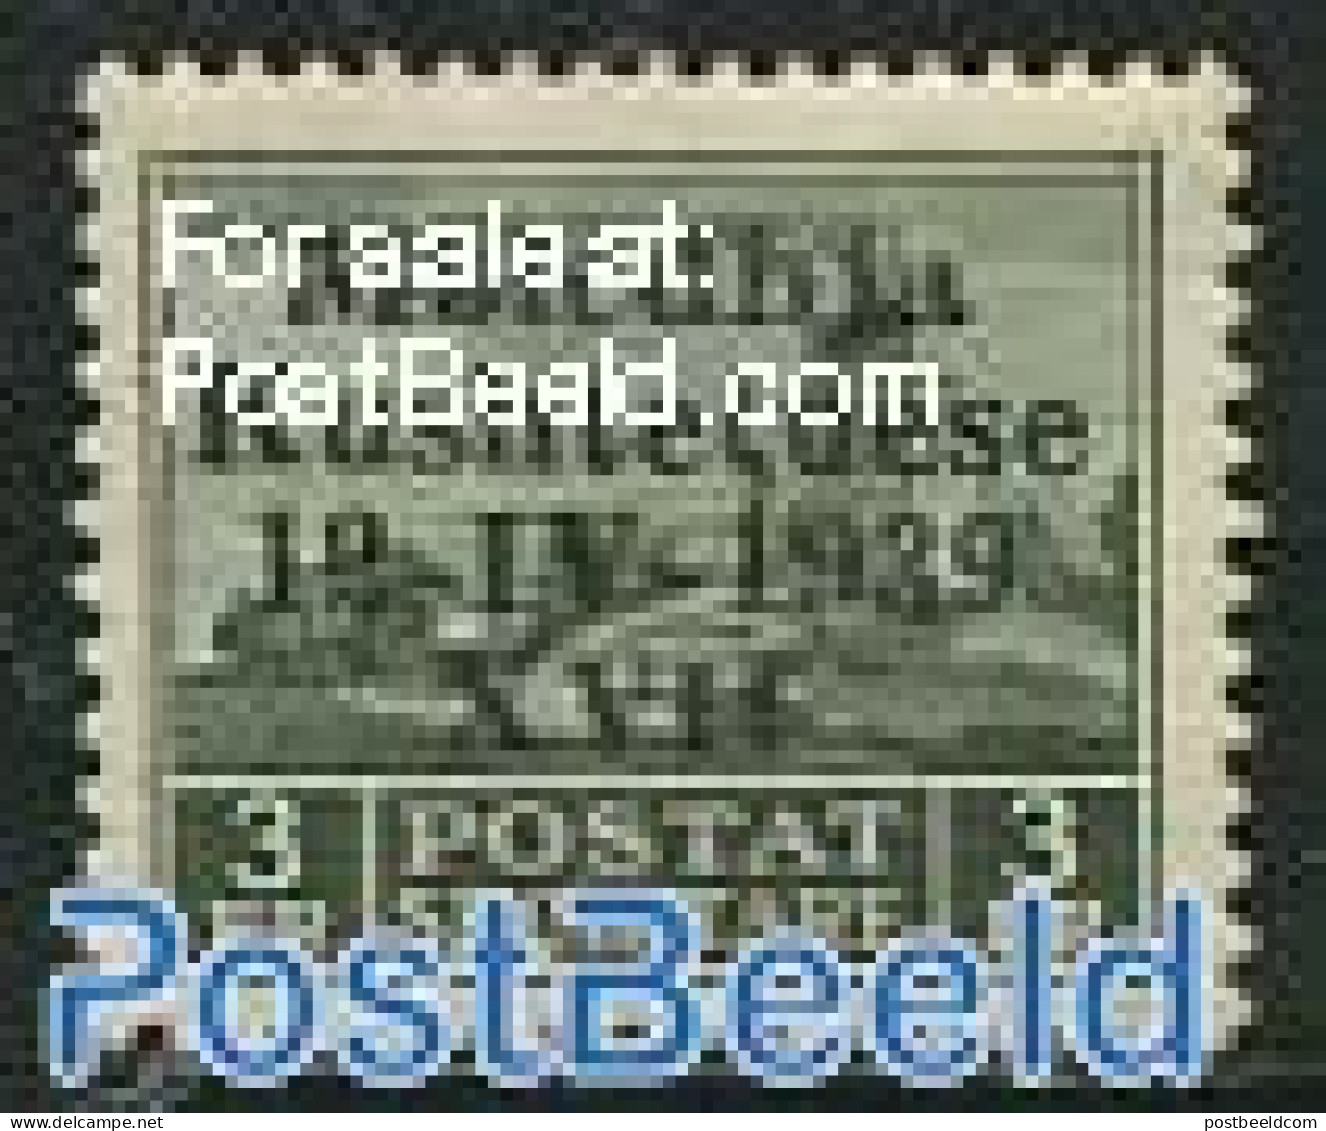 Albania 1939 3Fr, Stamp Out Of Set, Mint NH - Albanien